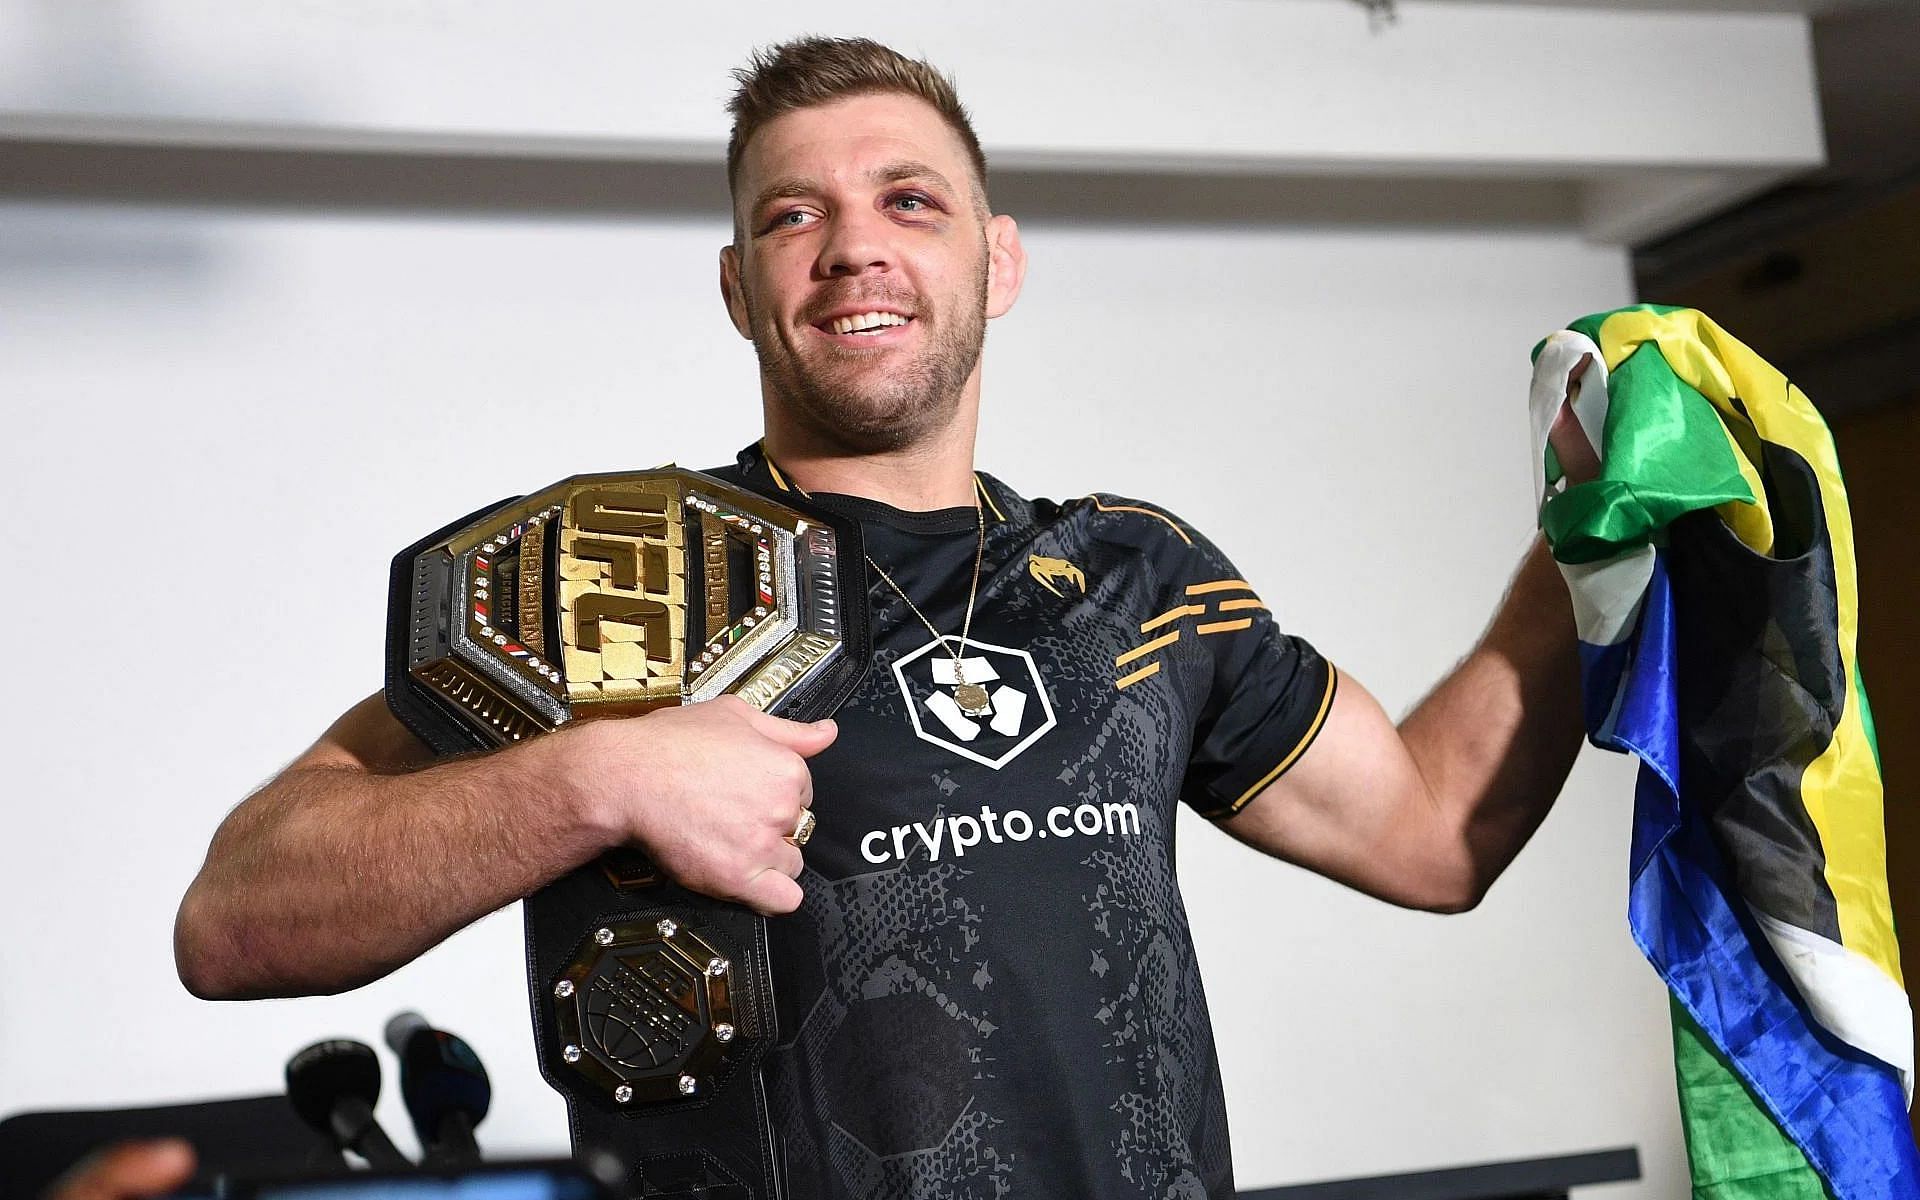 UFC middleweight champ Dricus du Plessis (pictured) could feature at UFC 300 depending on his health status [Image Courtesy: @GettyImages]